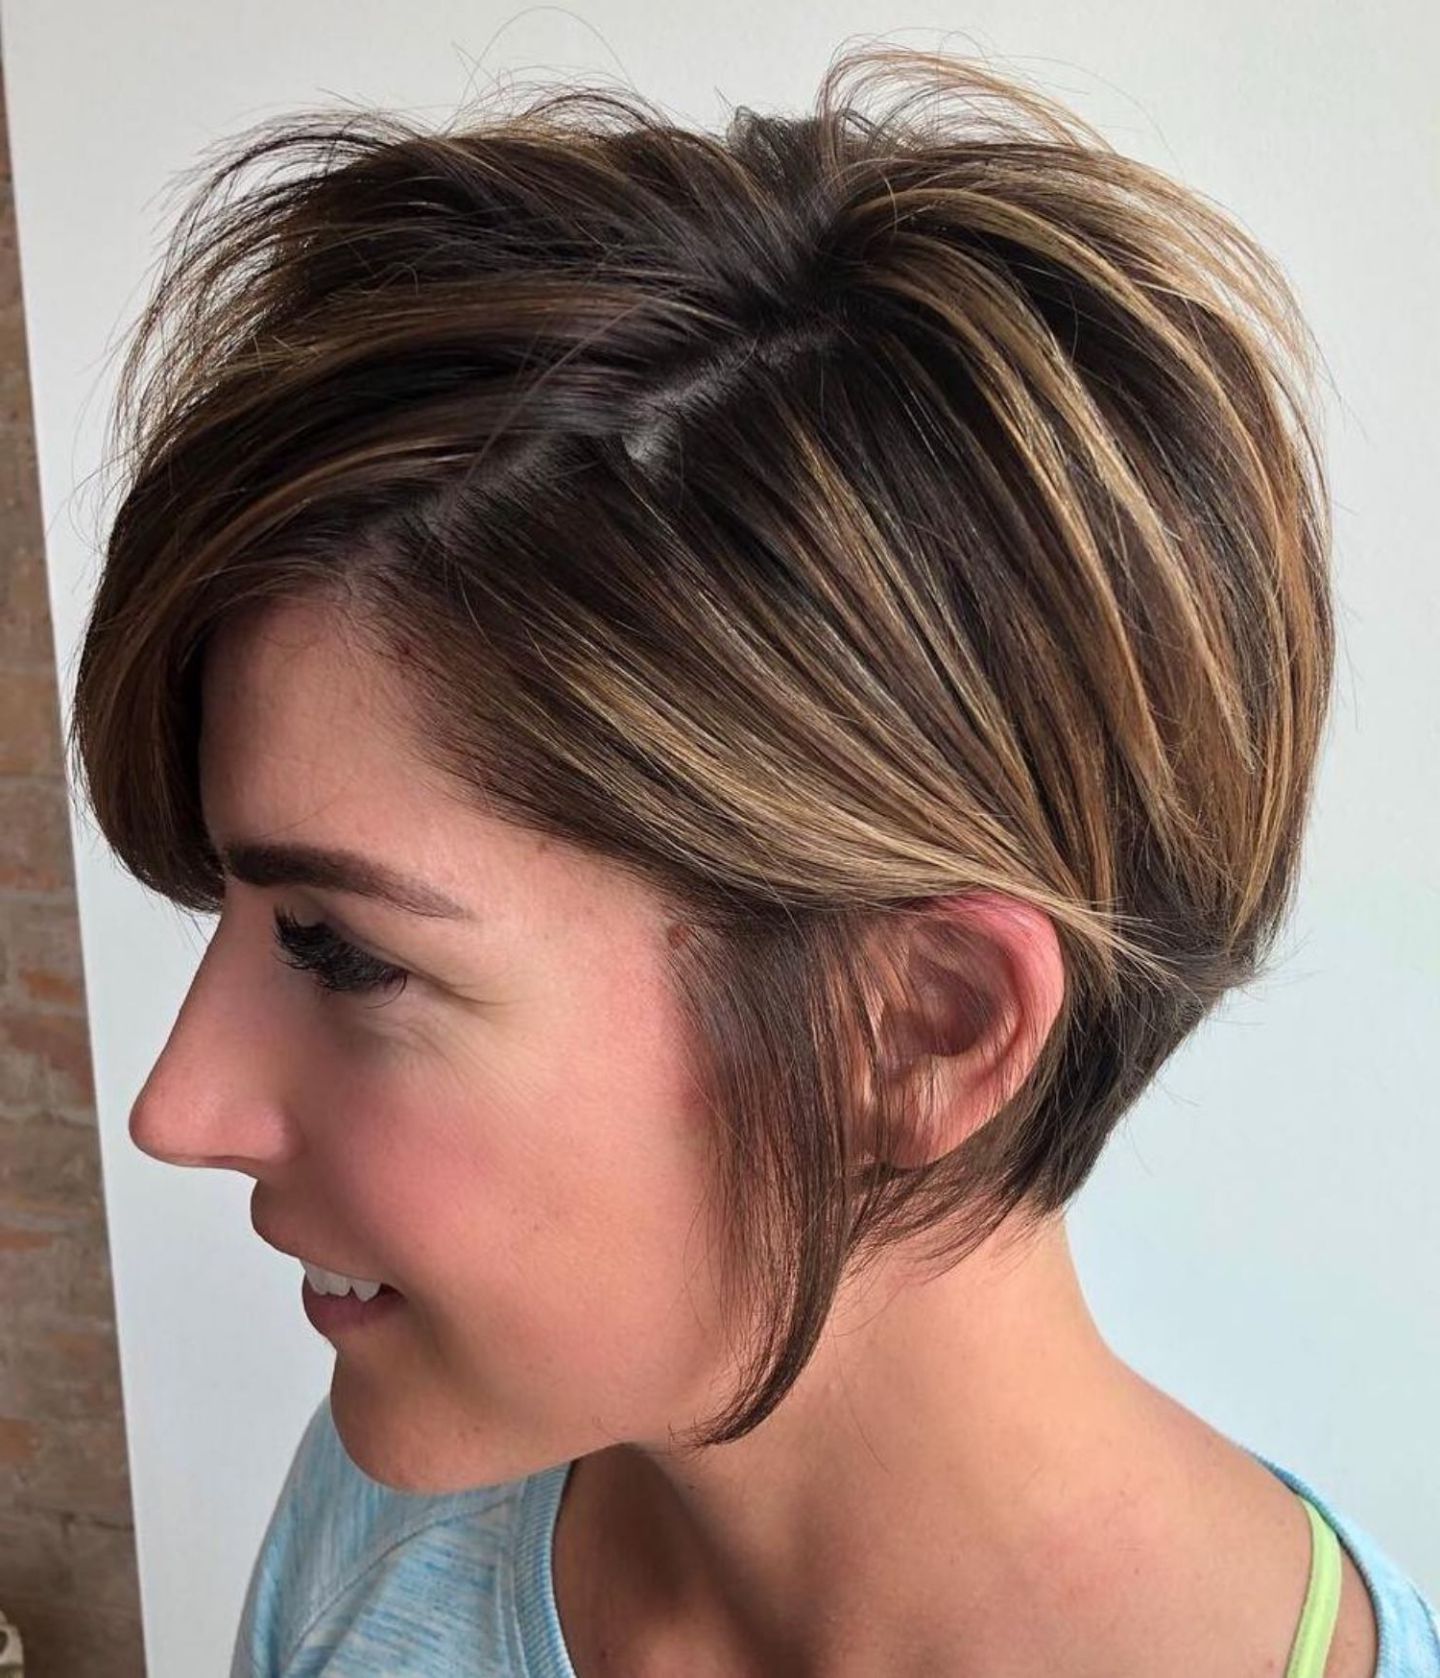 100 Mind Blowing Short Hairstyles For Fine Hair | Hair | Pinterest In Long Disheveled Pixie Haircuts With Balayage Highlights (View 1 of 20)